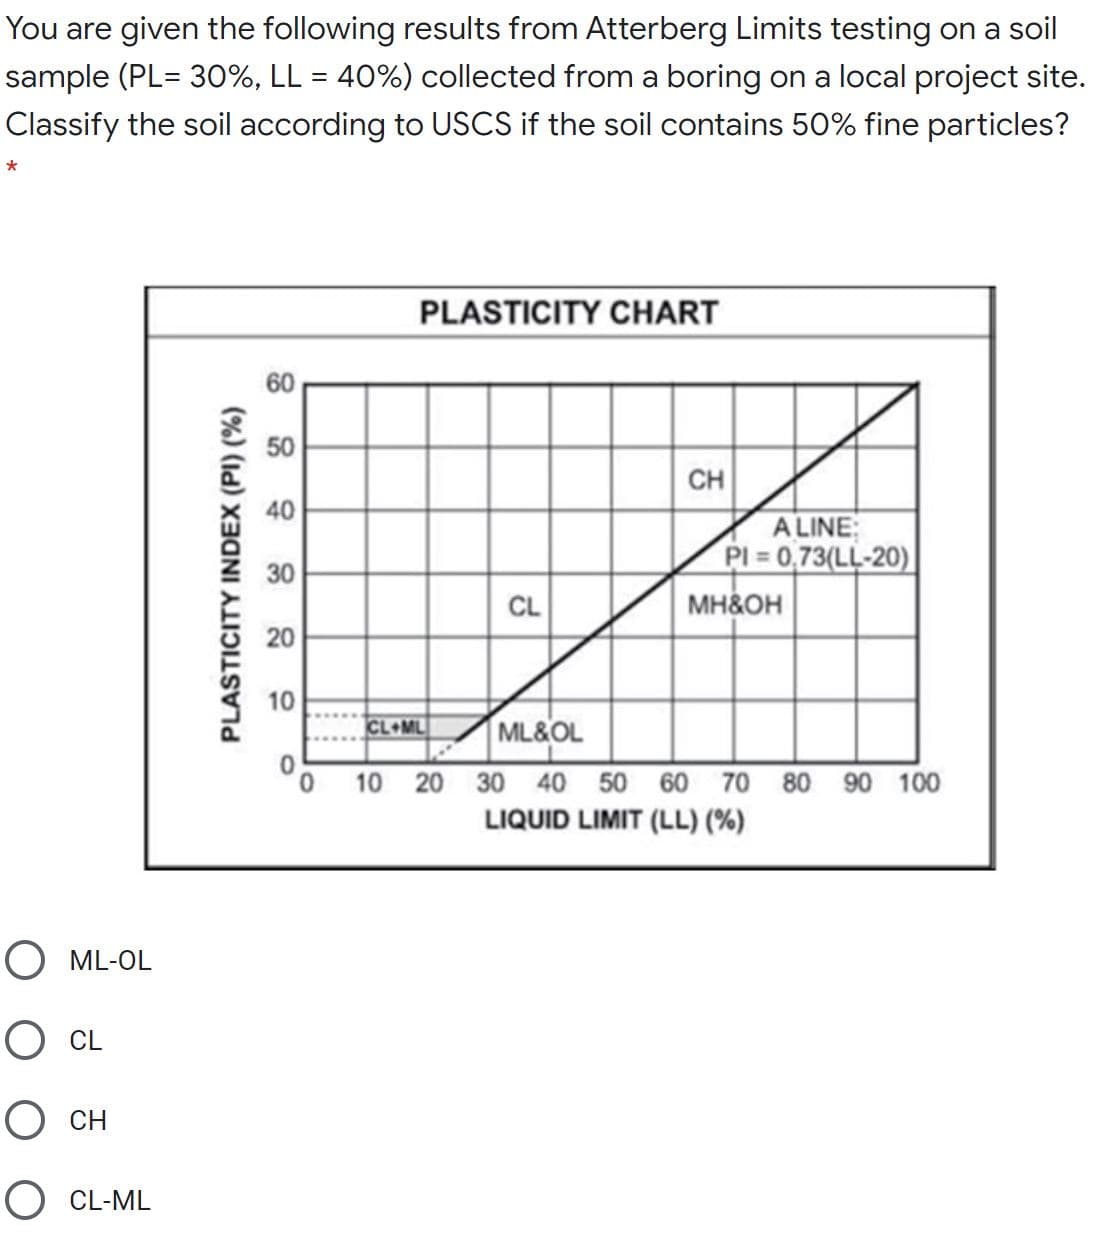 You are given the following results from Atterberg Limits testing on a soil
sample (PL= 30%, LL = 40%) collected from a boring on a local project site.
%3D
Classify the soil according to USCS if the soil contains 50% fine particles?
PLASTICITY CHART
60
50
CH
40
A LINE:
PI 0,73(LL-20)
MH&OH
30
CL
20
CL ML
ML&OL
10 20 30 40 50 60
70 80 90 100
LIQUID LIMIT (LL) (%)
O ML-OL
O CL
О сн
O CL-ML
PLASTICITY INDEX (PI) (%)
